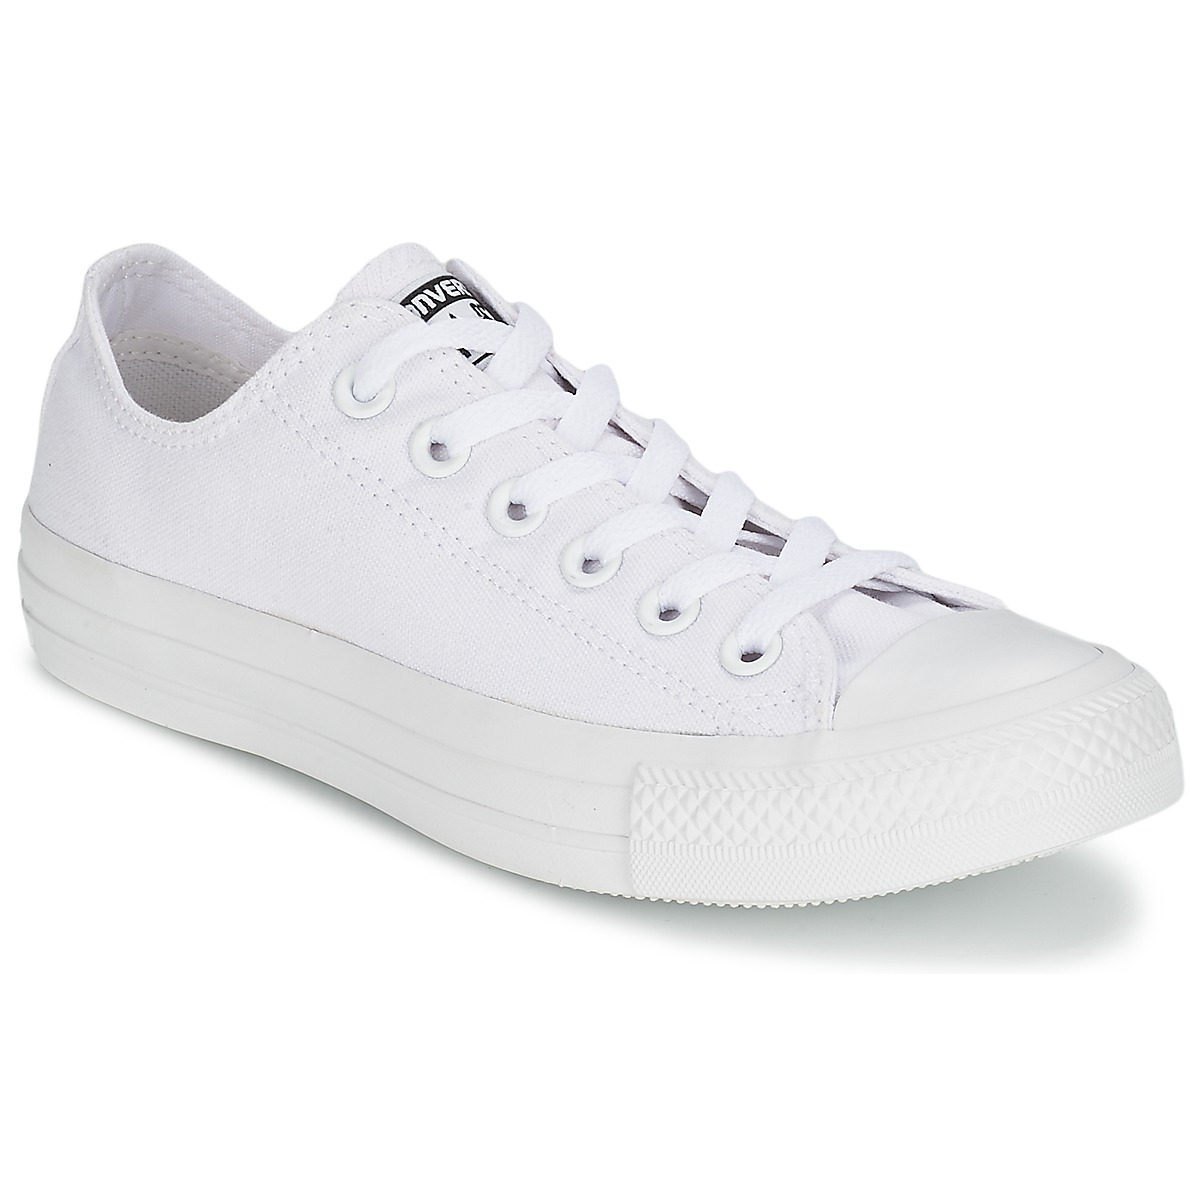 Xαμηλά Sneakers Converse CHUCK TAYLOR ALL STAR MONO OX